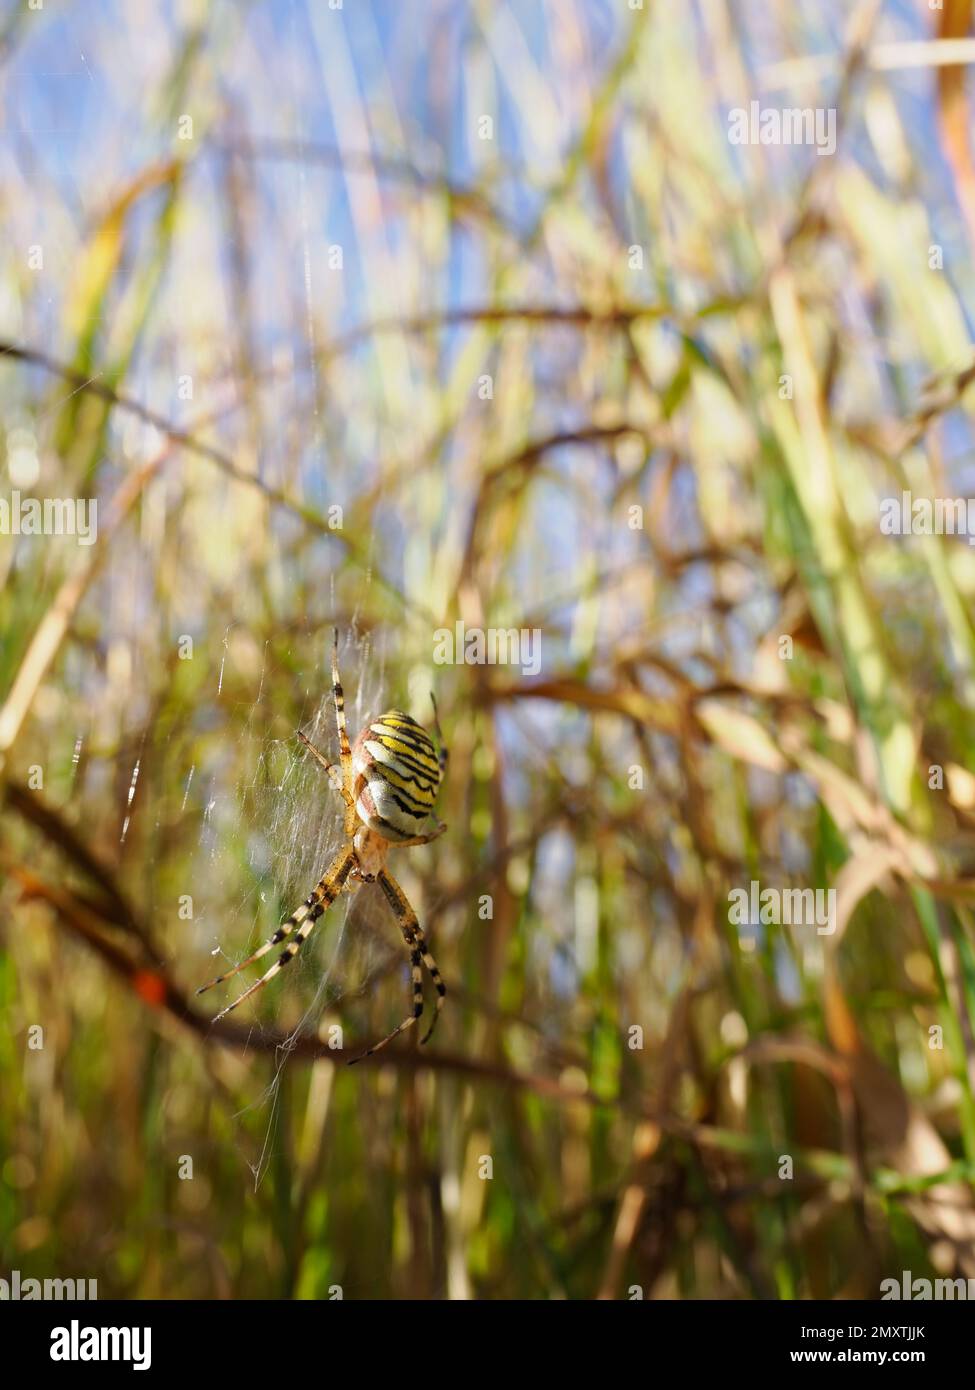 A female wasp spider on her web that is positioned low in the grass. Stock Photo